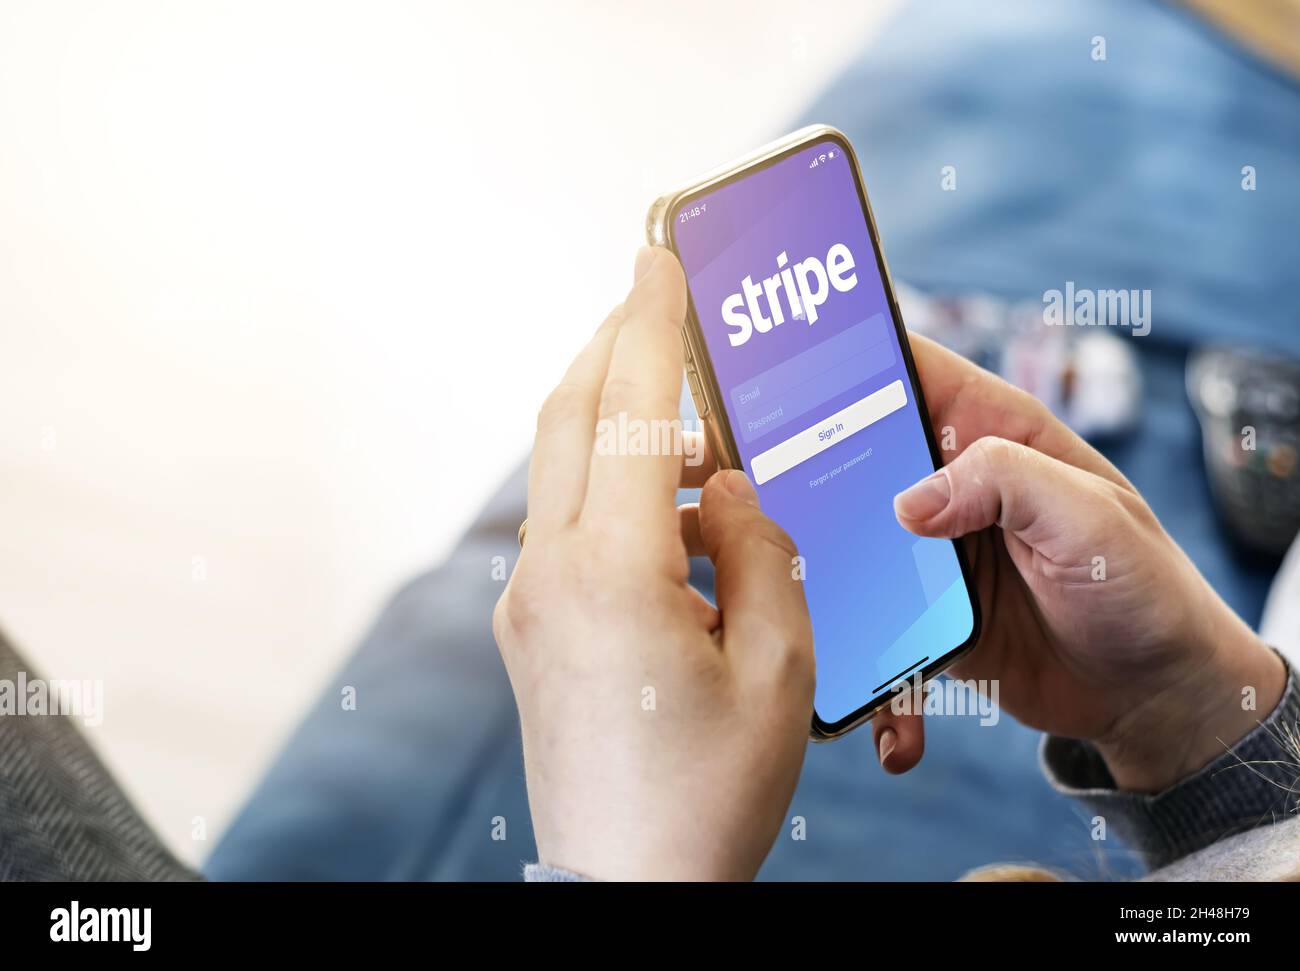 San Francisco, CA, USA, March 15, 2021: Woman holding a smart phone with Stripe app on the screen. Stripe is an American financial services company. B Stock Photo